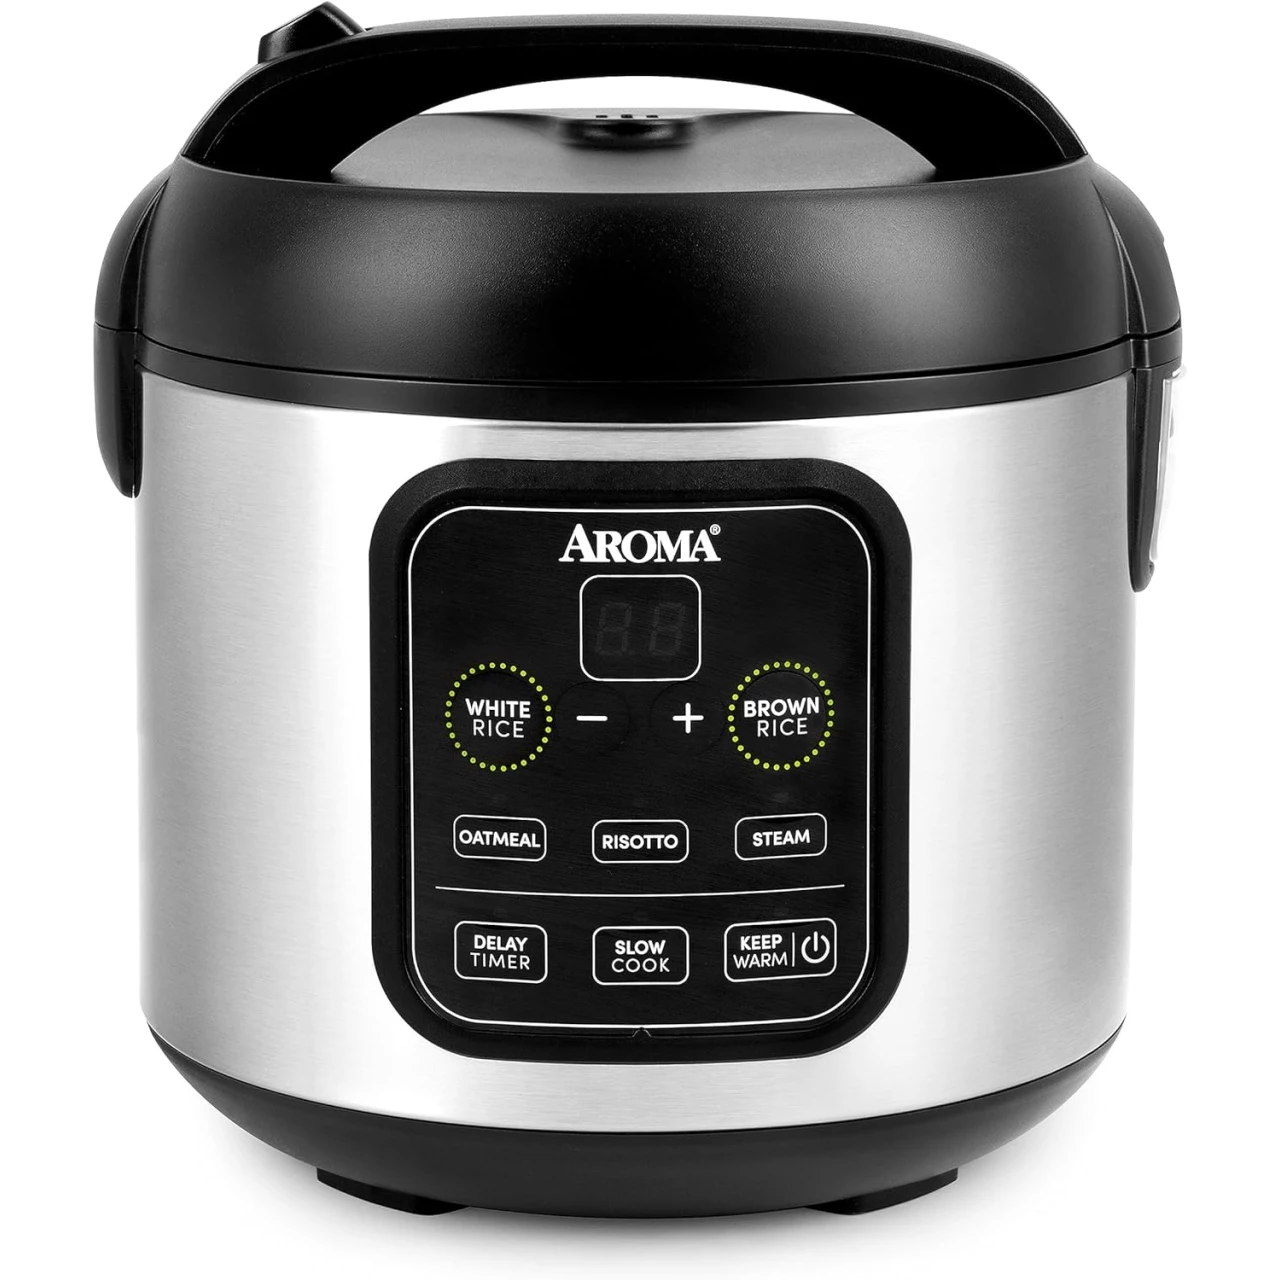 Aroma Housewares ARC-994SB Rice &amp; Grain Cooker Slow Cook, Steam, Oatmeal, Risotto, 8-cup cooked/4-cup uncooked/2Qt, Stainless Steel